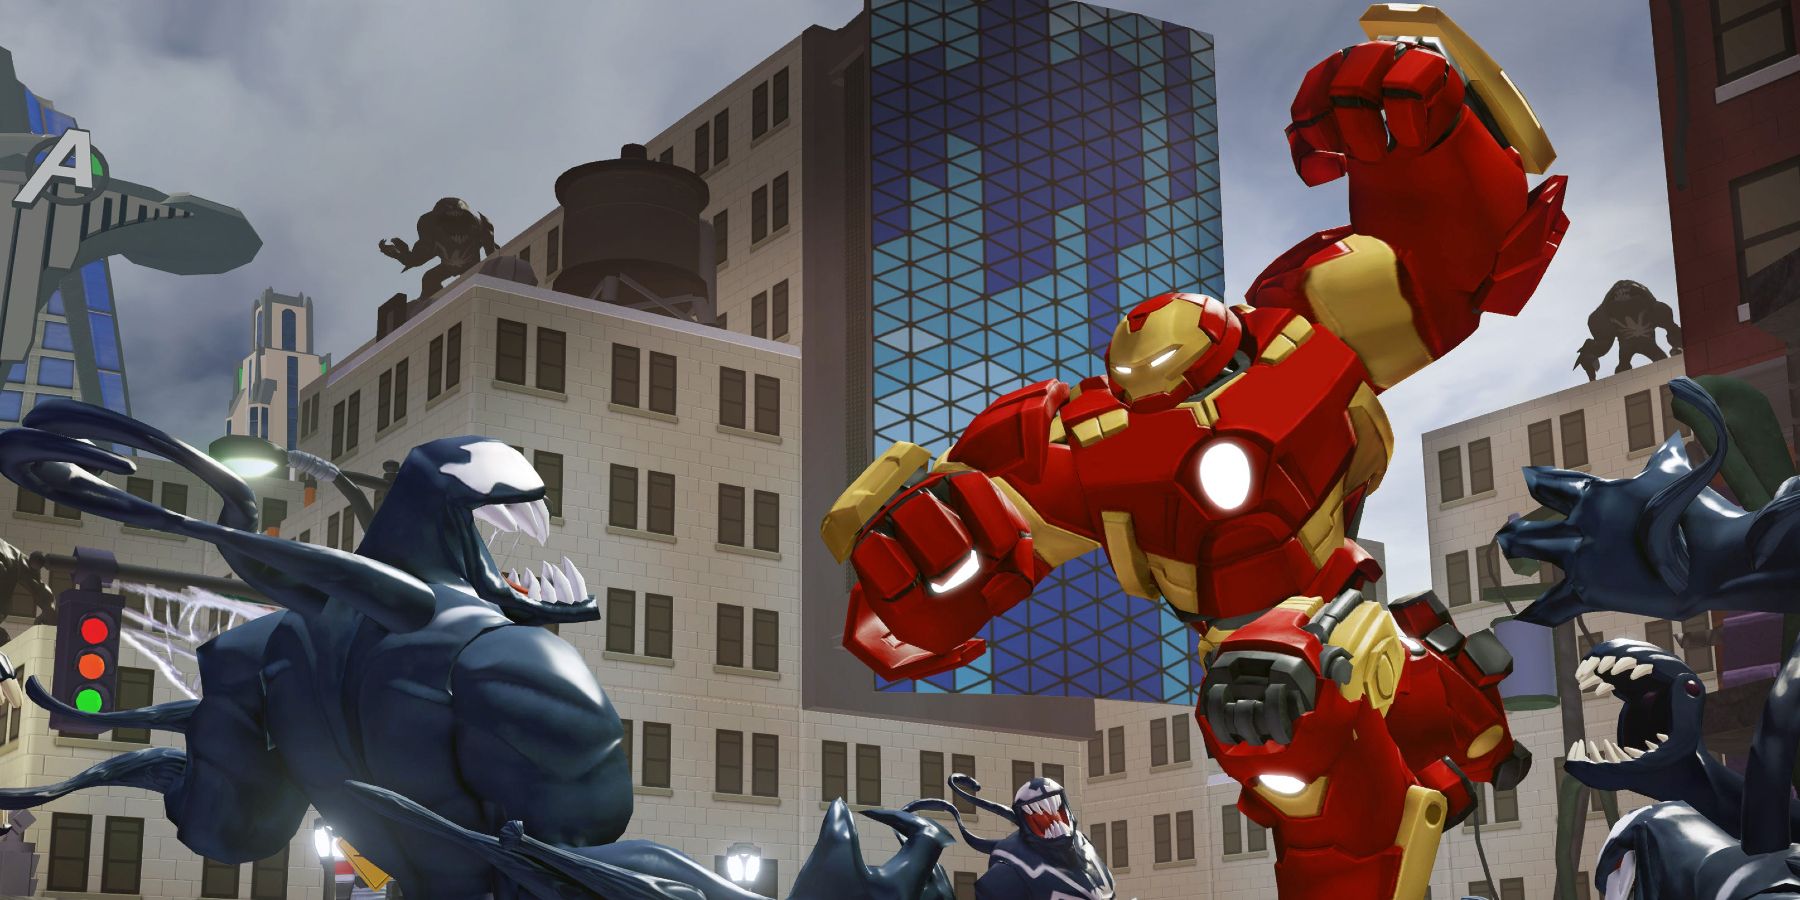 Hulkbuster charging into battle with an army of symbiotes in Disney Infinity